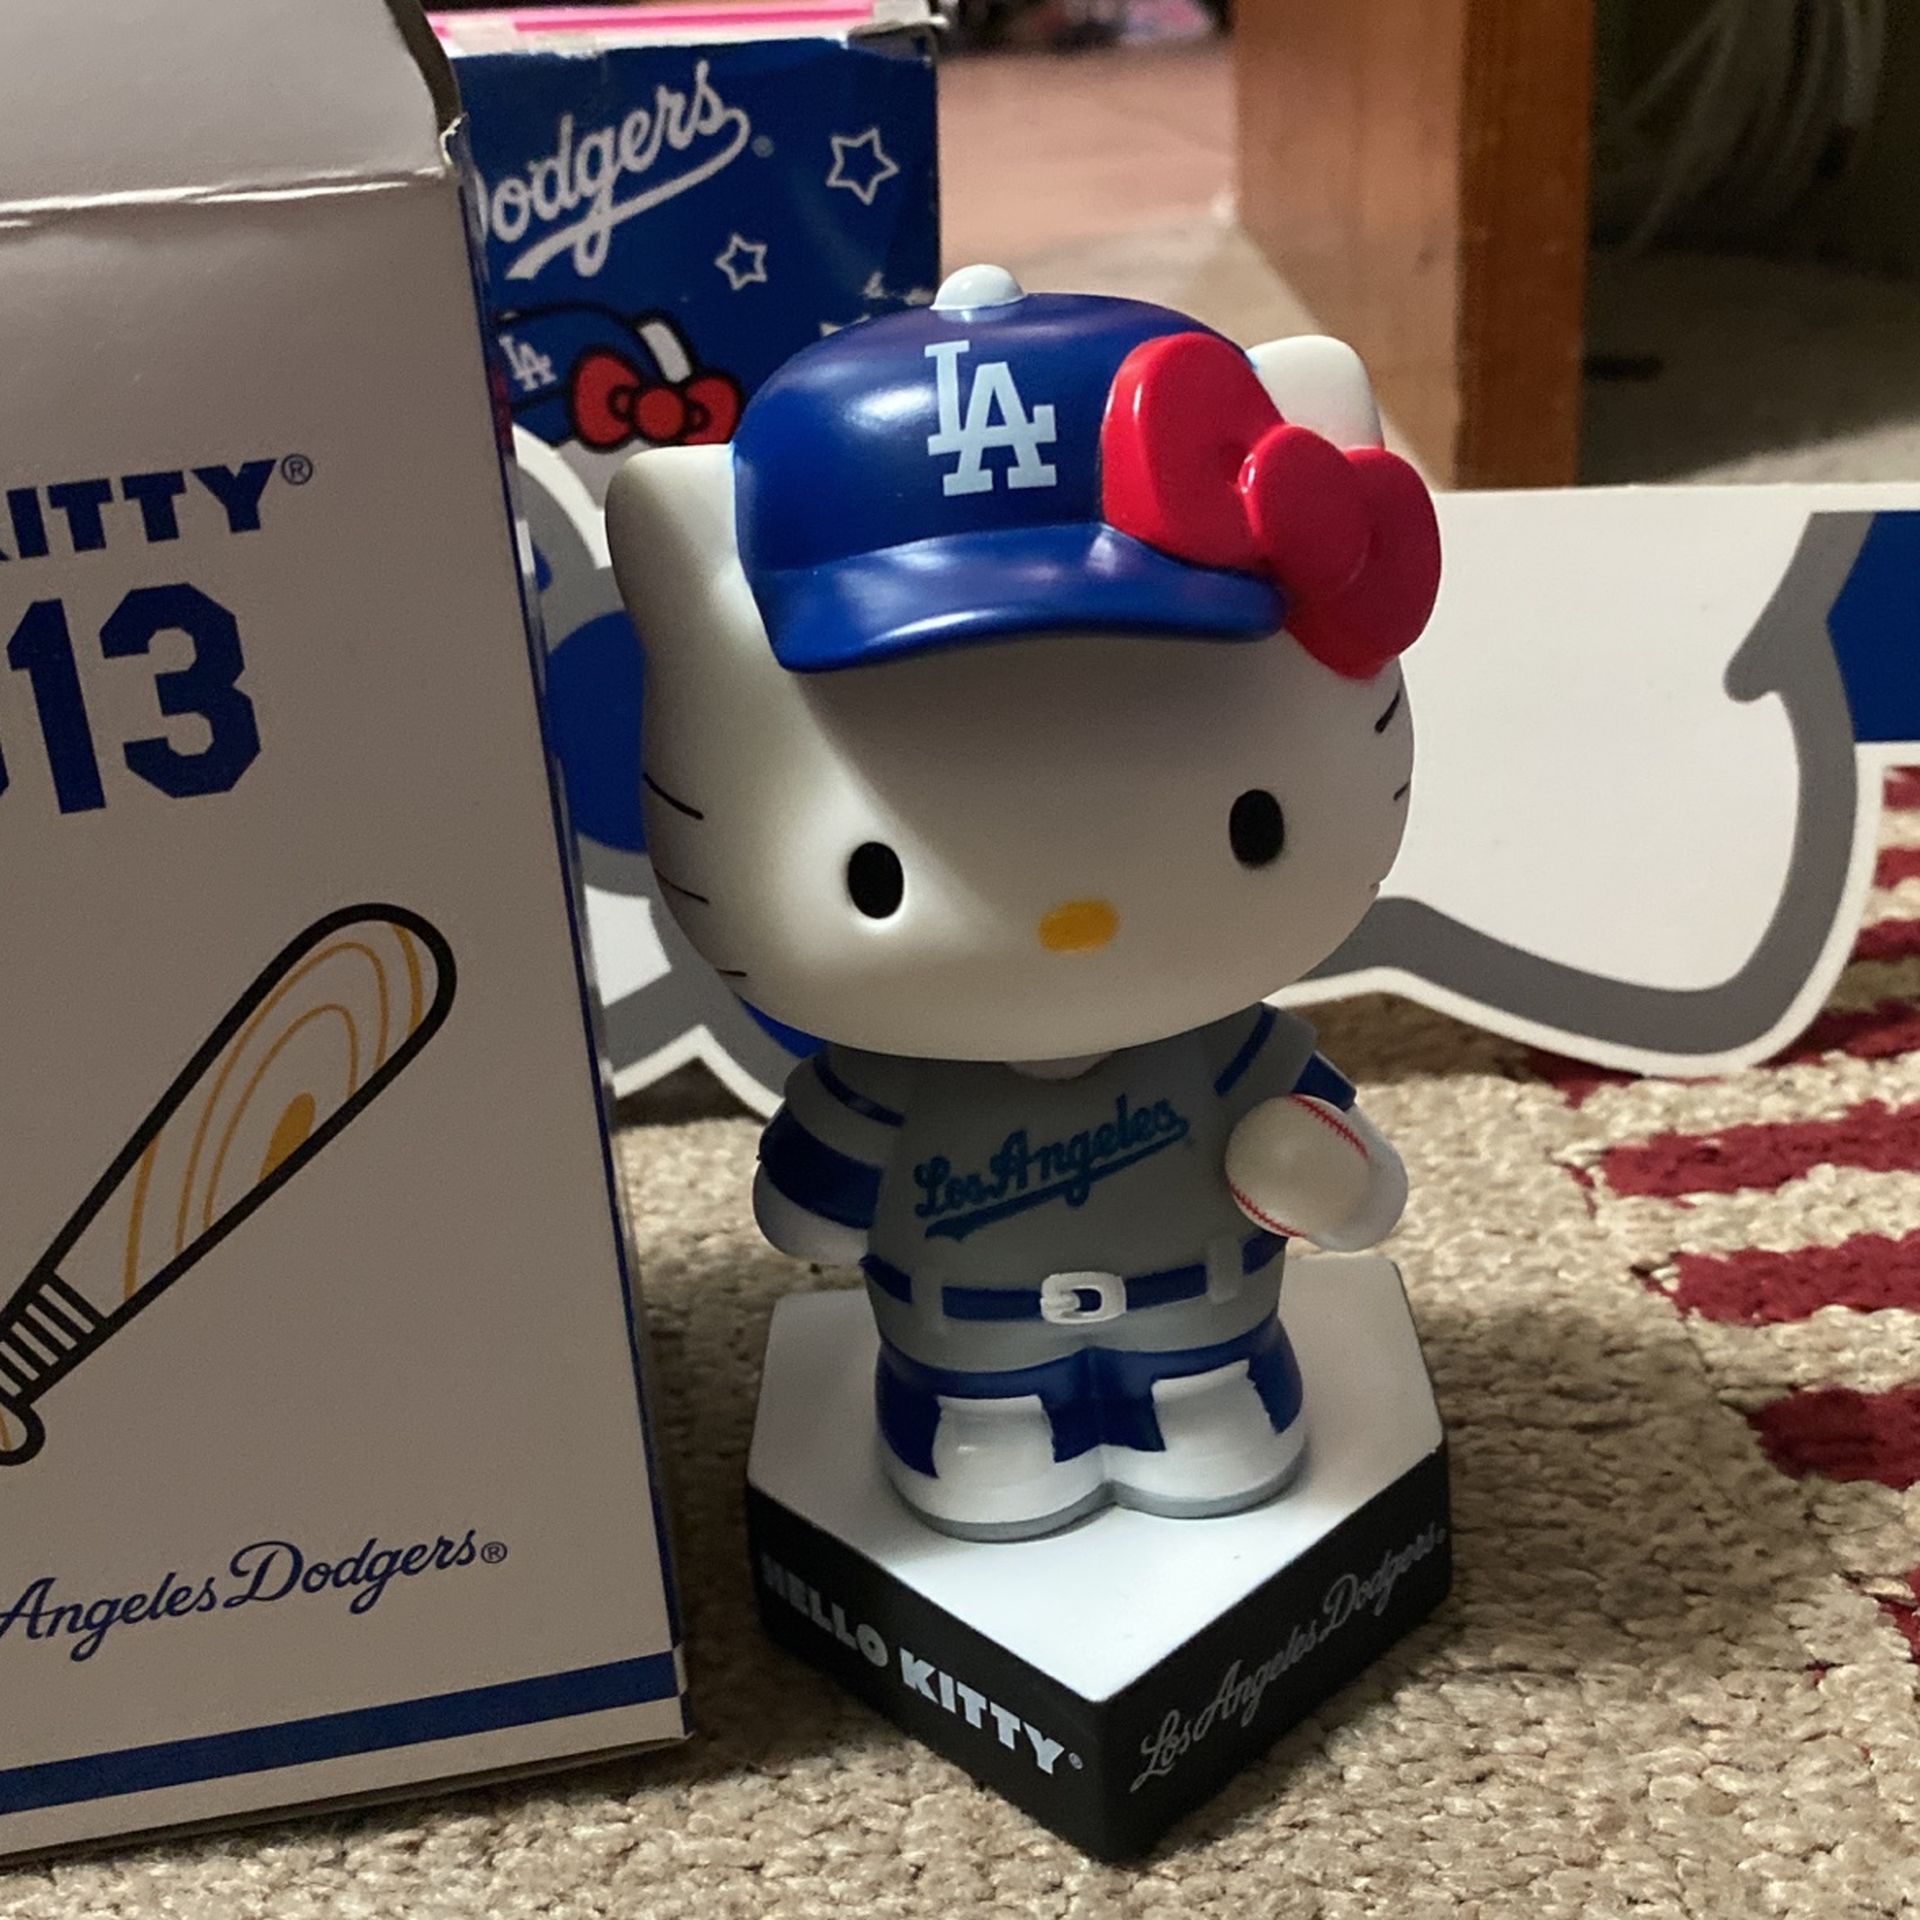 Dodger Hello Kitty Bobblehead for Sale in Inglewood, CA - OfferUp